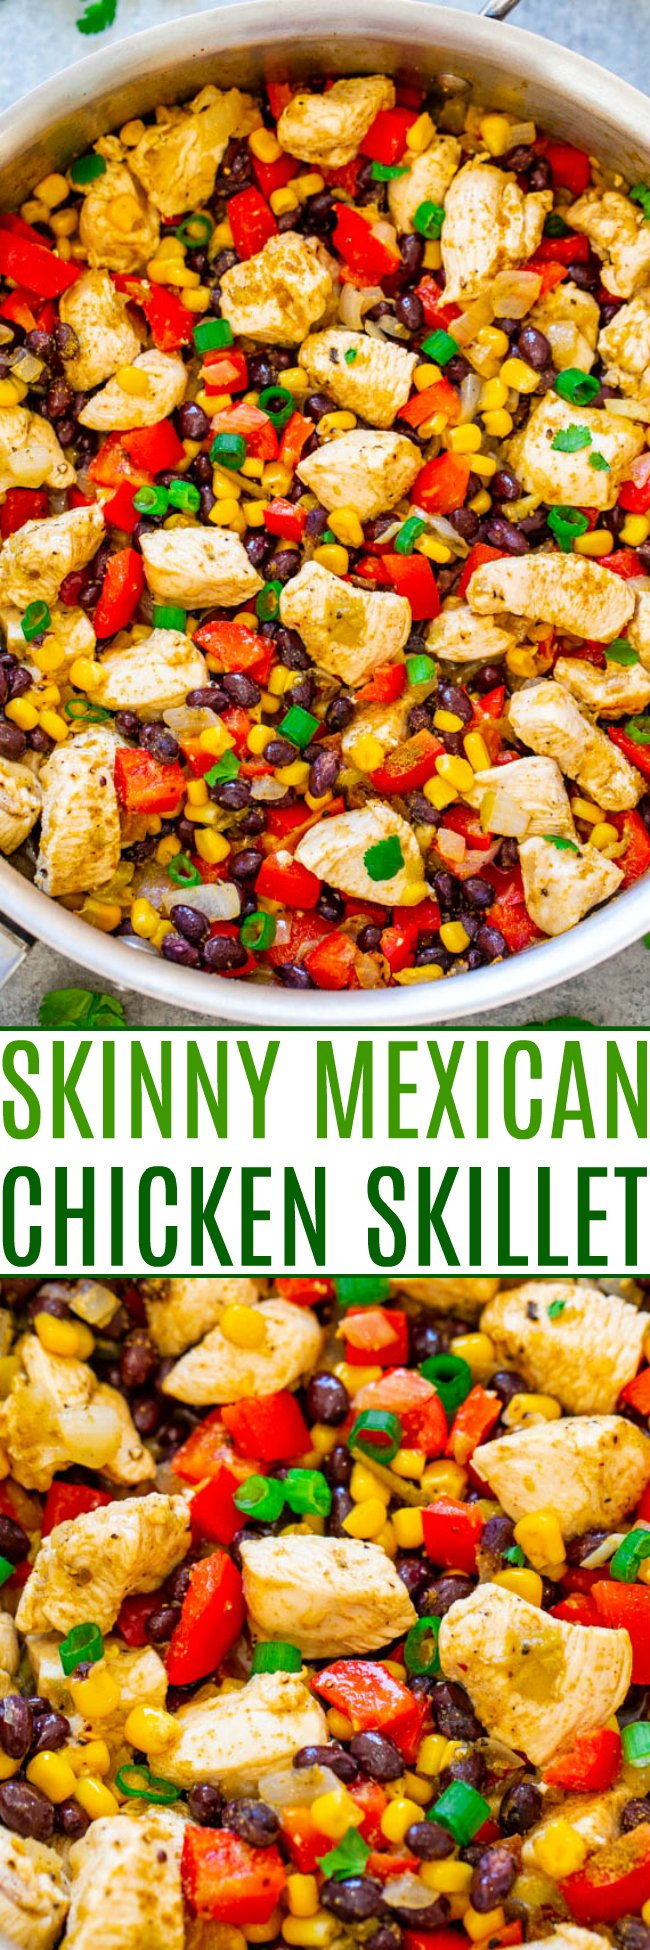 Skinny Mexican Chicken Skillet - EASY, ready in 20 minutes, and is a skinny recipe that keeps you full and satisfied!! A great Mexican-inspired meal that's naturally gluten-free and is a flavor FIESTA in your mouth!!